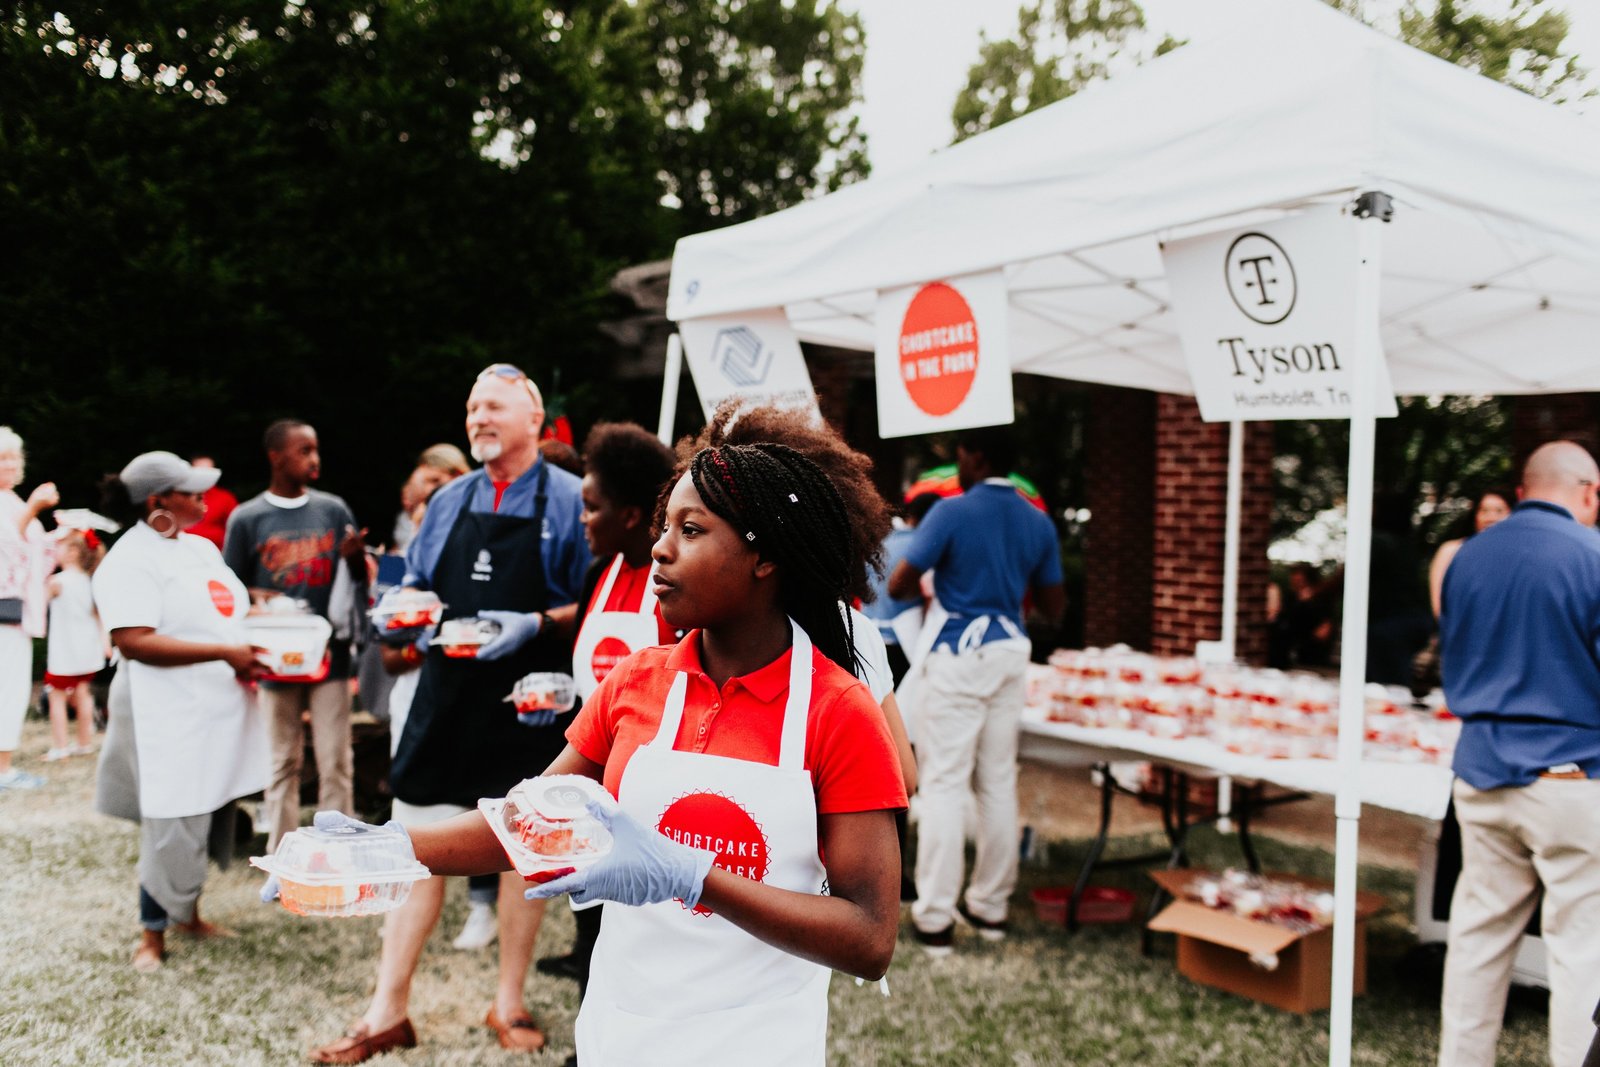 2019 West Tennessee Strawberry Festival - Shortcake in the park - 11